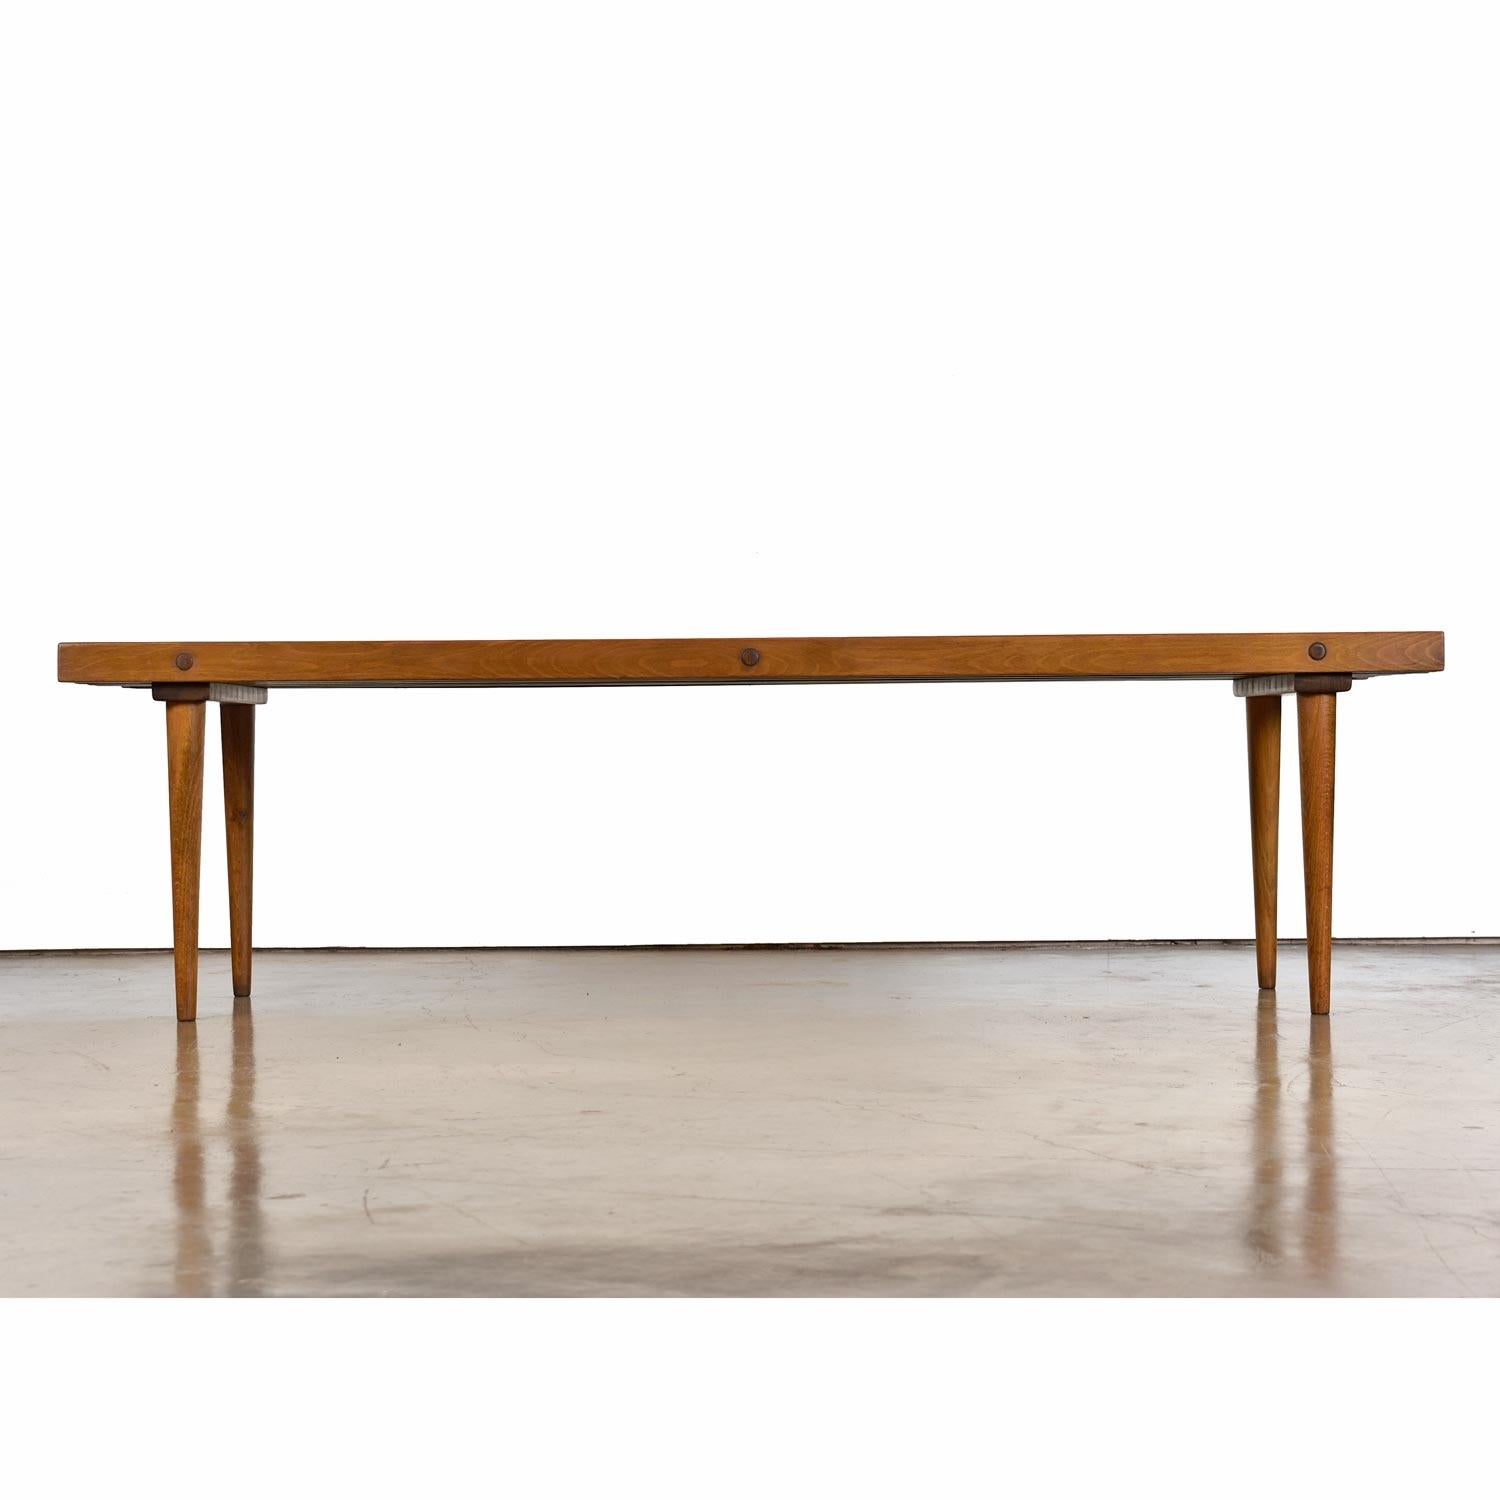 The Mid-Century Modern slat bench is perhaps one of the most recognizable and beloved pieces of furniture from the period. Every home needs at least one. It's practicality is only matched by its charmed. Use this solid beech wood piece as a bench,